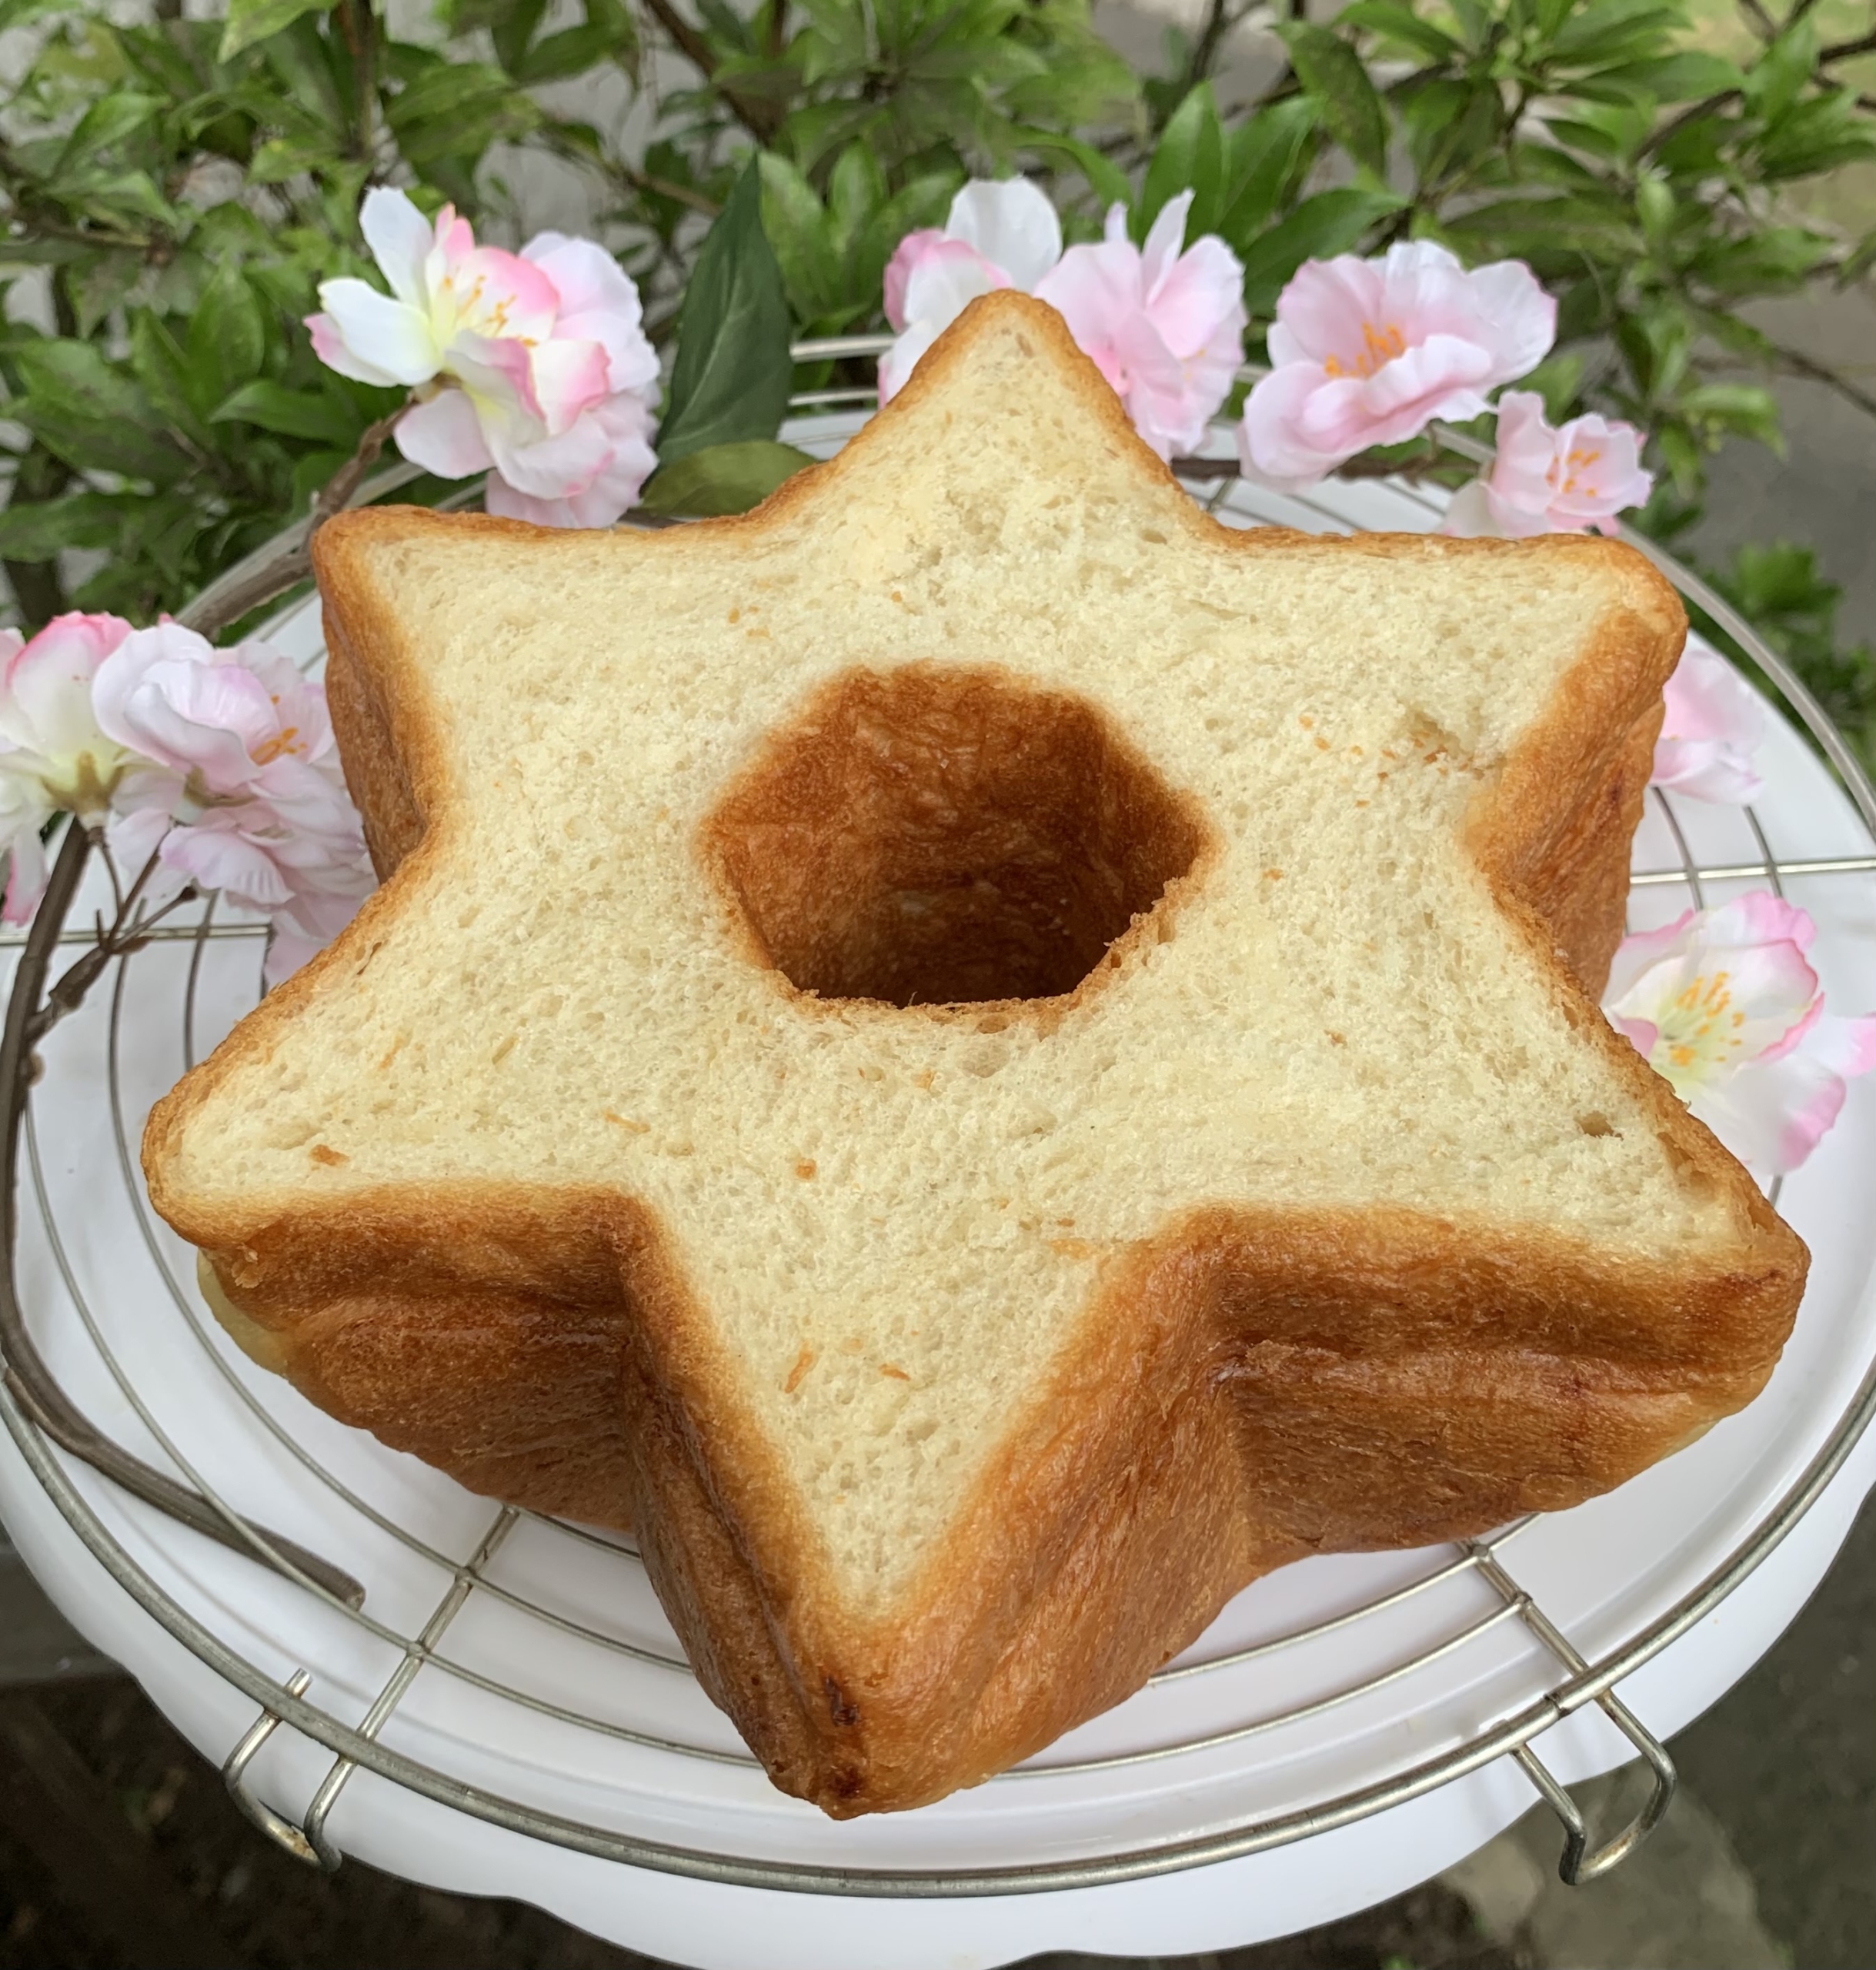 https://leaveittobubbe.com/wp-content/uploads/2021/08/Jewish-Star-Challah-2-scaled.jpg